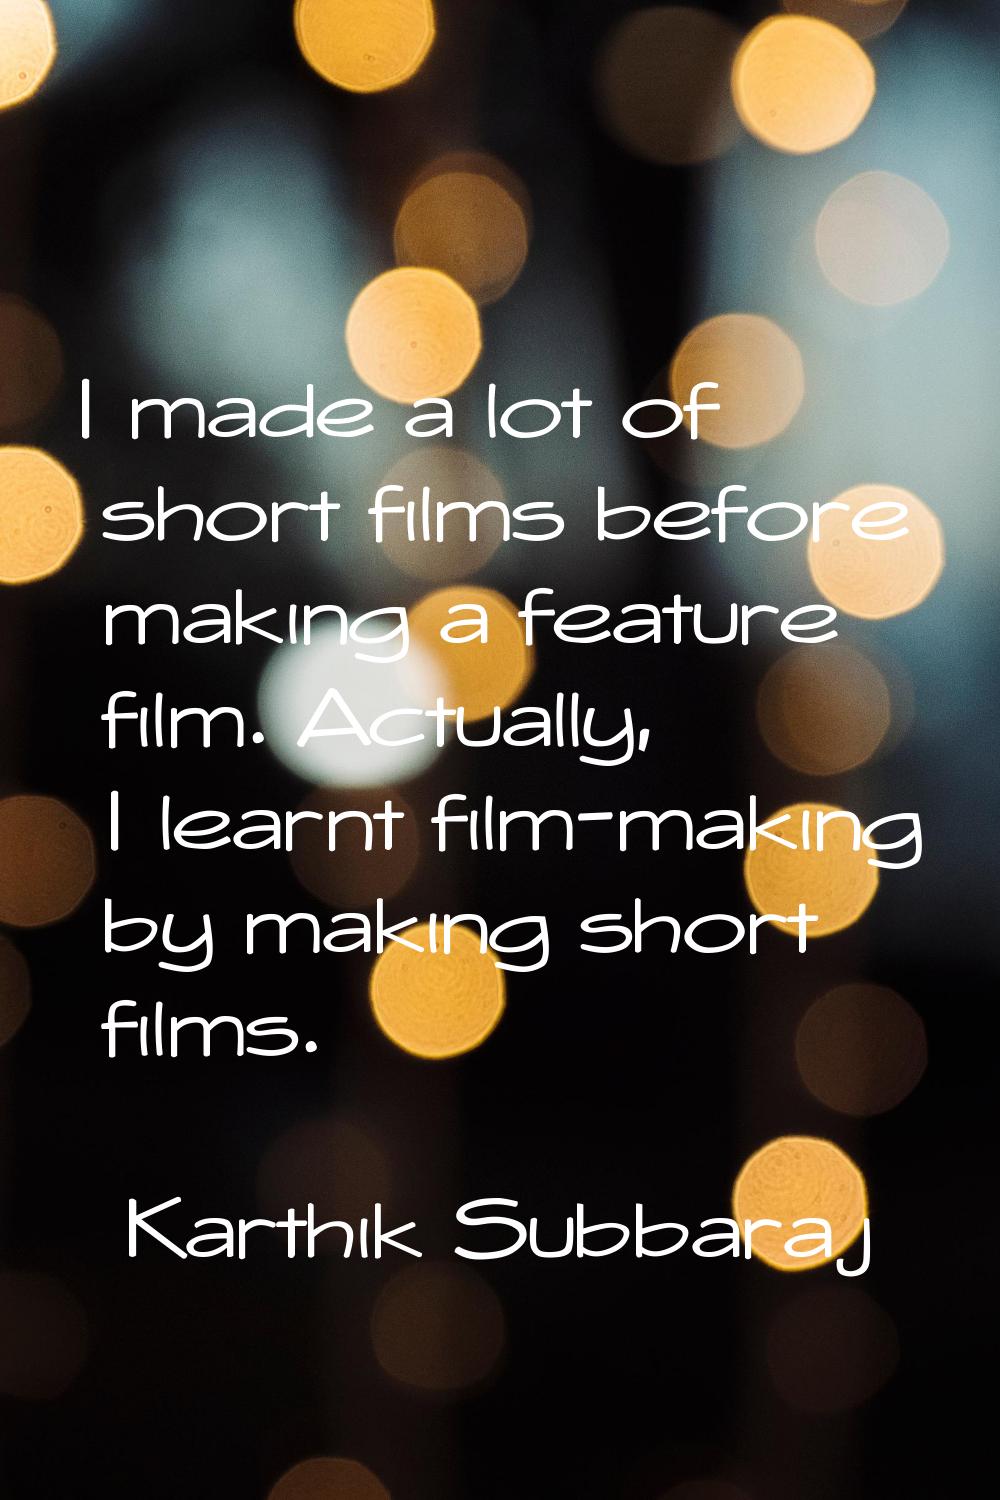 I made a lot of short films before making a feature film. Actually, I learnt film-making by making 